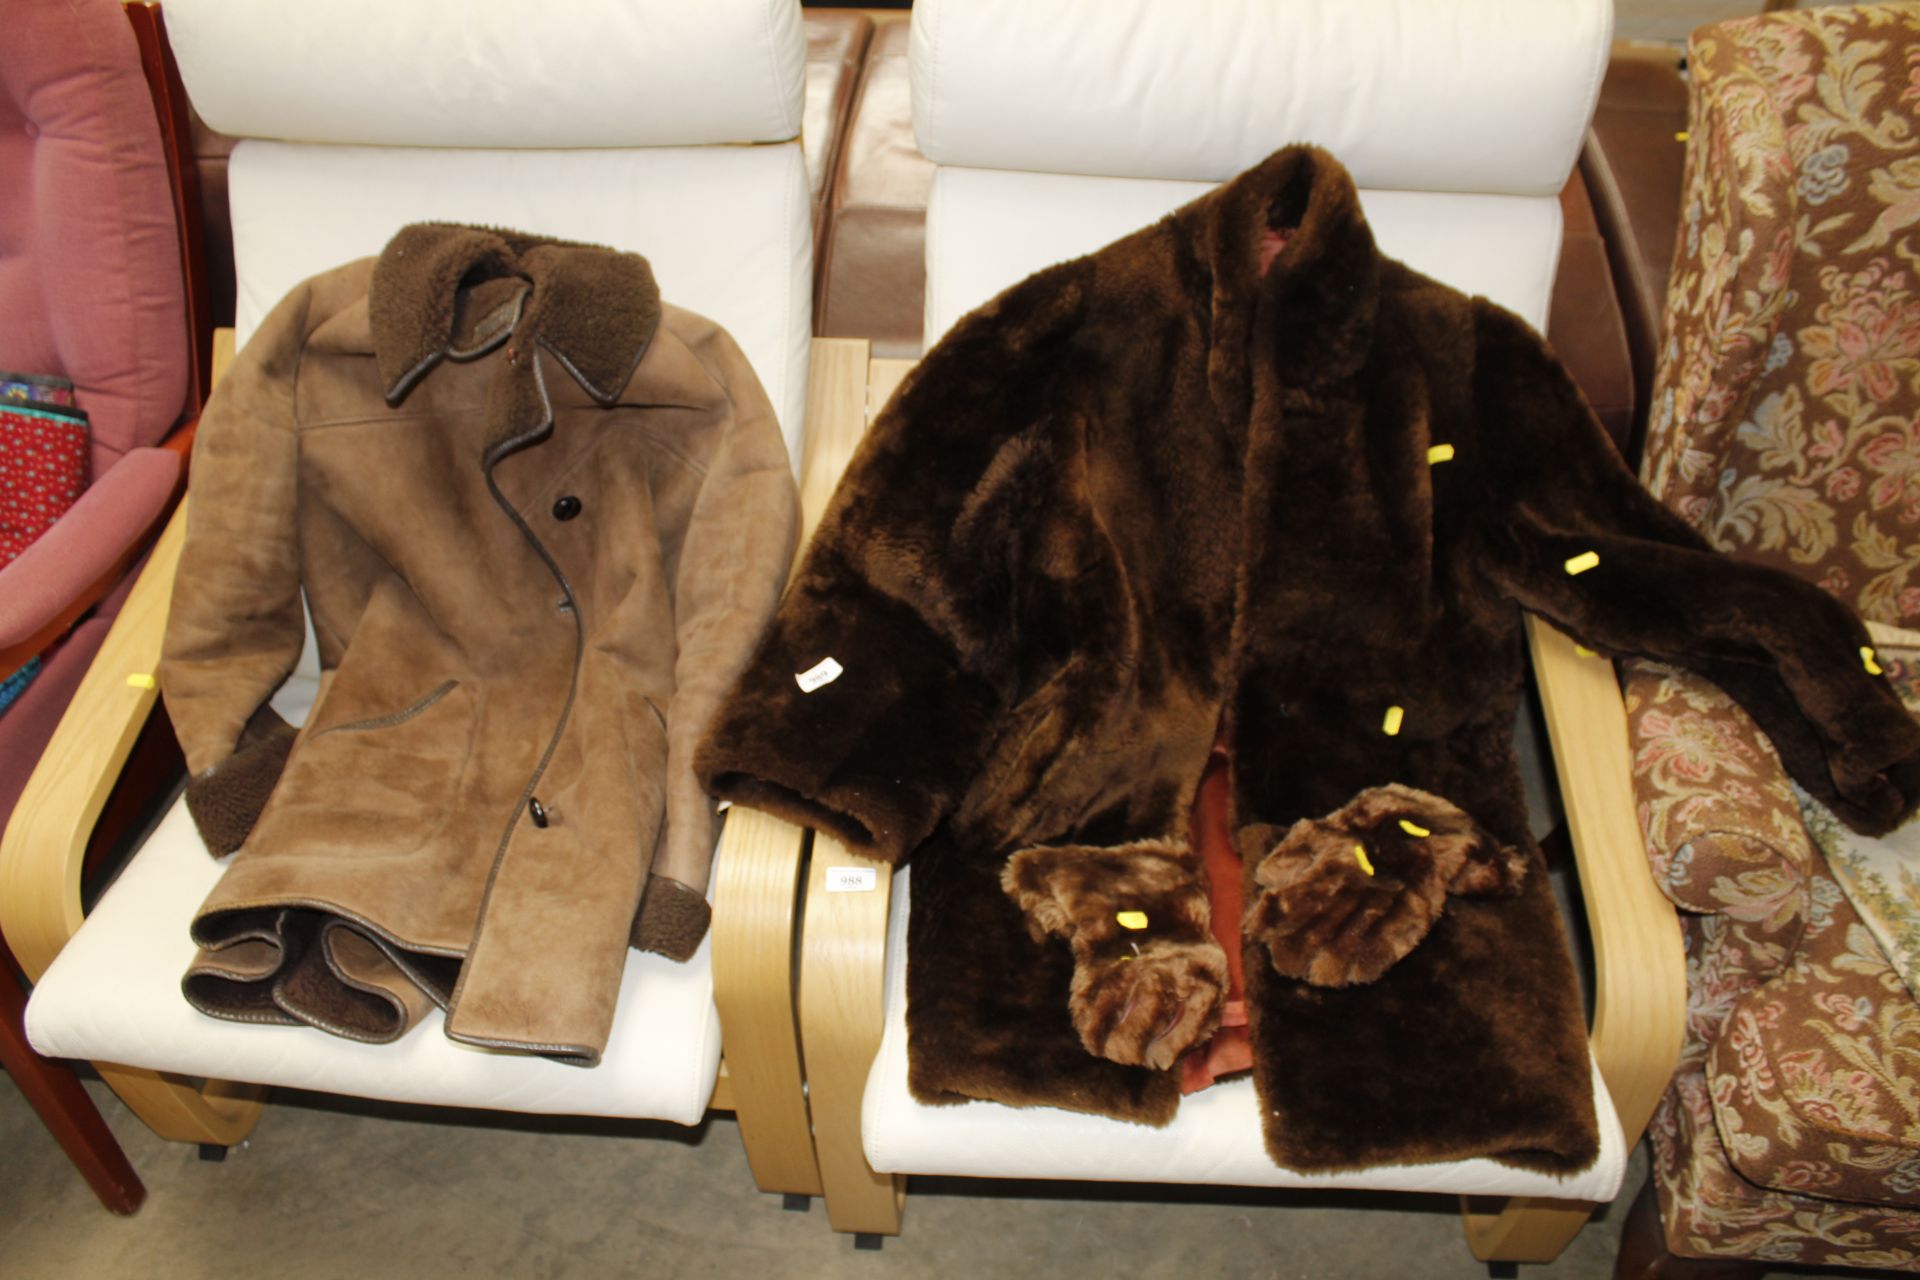 A suede coat and another coat with gloves